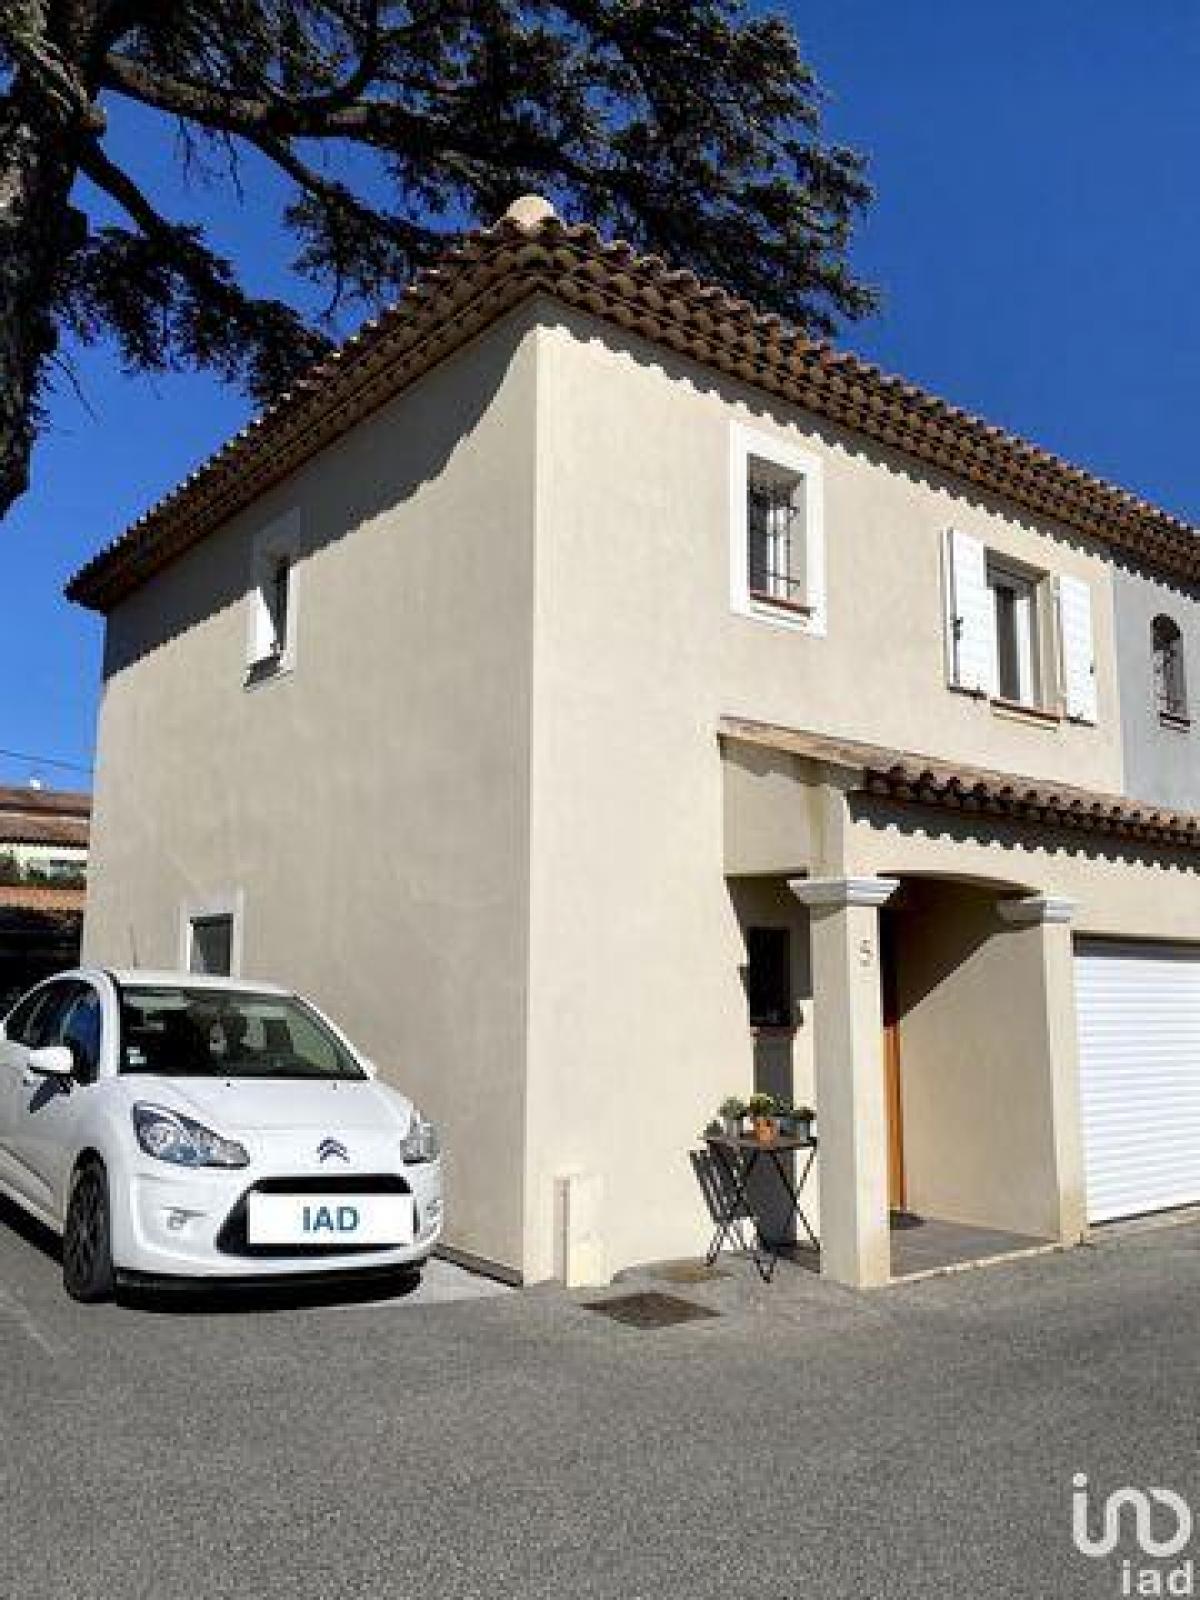 Picture of Home For Sale in Cuers, Provence-Alpes-Cote d'Azur, France